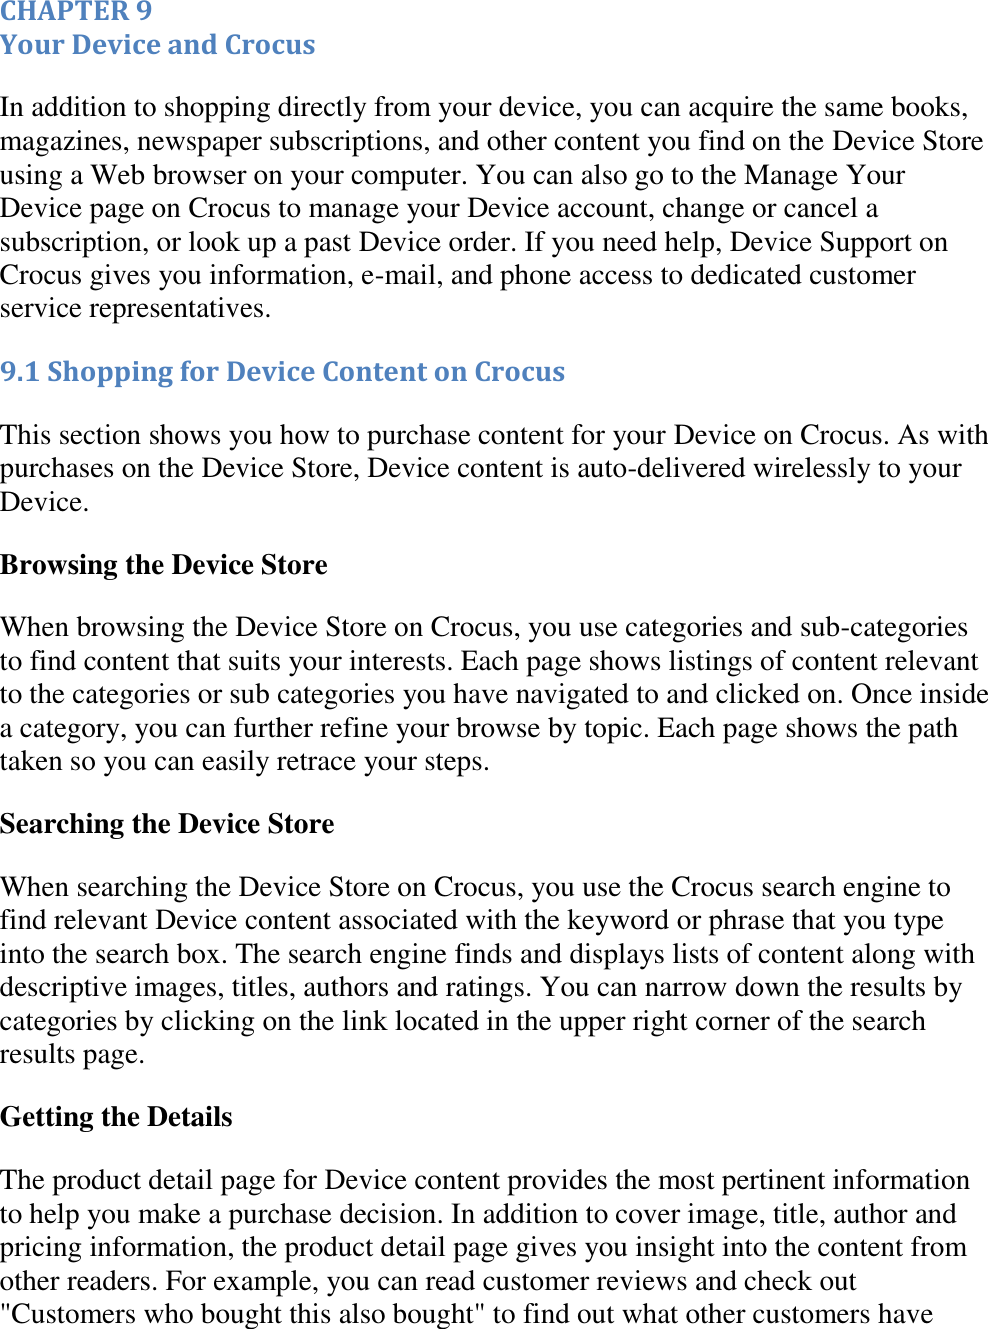   CHAPTER 9 Your Device and Crocus In addition to shopping directly from your device, you can acquire the same books, magazines, newspaper subscriptions, and other content you find on the Device Store using a Web browser on your computer. You can also go to the Manage Your Device page on Crocus to manage your Device account, change or cancel a subscription, or look up a past Device order. If you need help, Device Support on Crocus gives you information, e-mail, and phone access to dedicated customer service representatives. 9.1 Shopping for Device Content on Crocus This section shows you how to purchase content for your Device on Crocus. As with purchases on the Device Store, Device content is auto-delivered wirelessly to your Device. Browsing the Device Store When browsing the Device Store on Crocus, you use categories and sub-categories to find content that suits your interests. Each page shows listings of content relevant to the categories or sub categories you have navigated to and clicked on. Once inside a category, you can further refine your browse by topic. Each page shows the path taken so you can easily retrace your steps. Searching the Device Store When searching the Device Store on Crocus, you use the Crocus search engine to find relevant Device content associated with the keyword or phrase that you type into the search box. The search engine finds and displays lists of content along with descriptive images, titles, authors and ratings. You can narrow down the results by categories by clicking on the link located in the upper right corner of the search results page. Getting the Details The product detail page for Device content provides the most pertinent information to help you make a purchase decision. In addition to cover image, title, author and pricing information, the product detail page gives you insight into the content from other readers. For example, you can read customer reviews and check out &quot;Customers who bought this also bought&quot; to find out what other customers have 